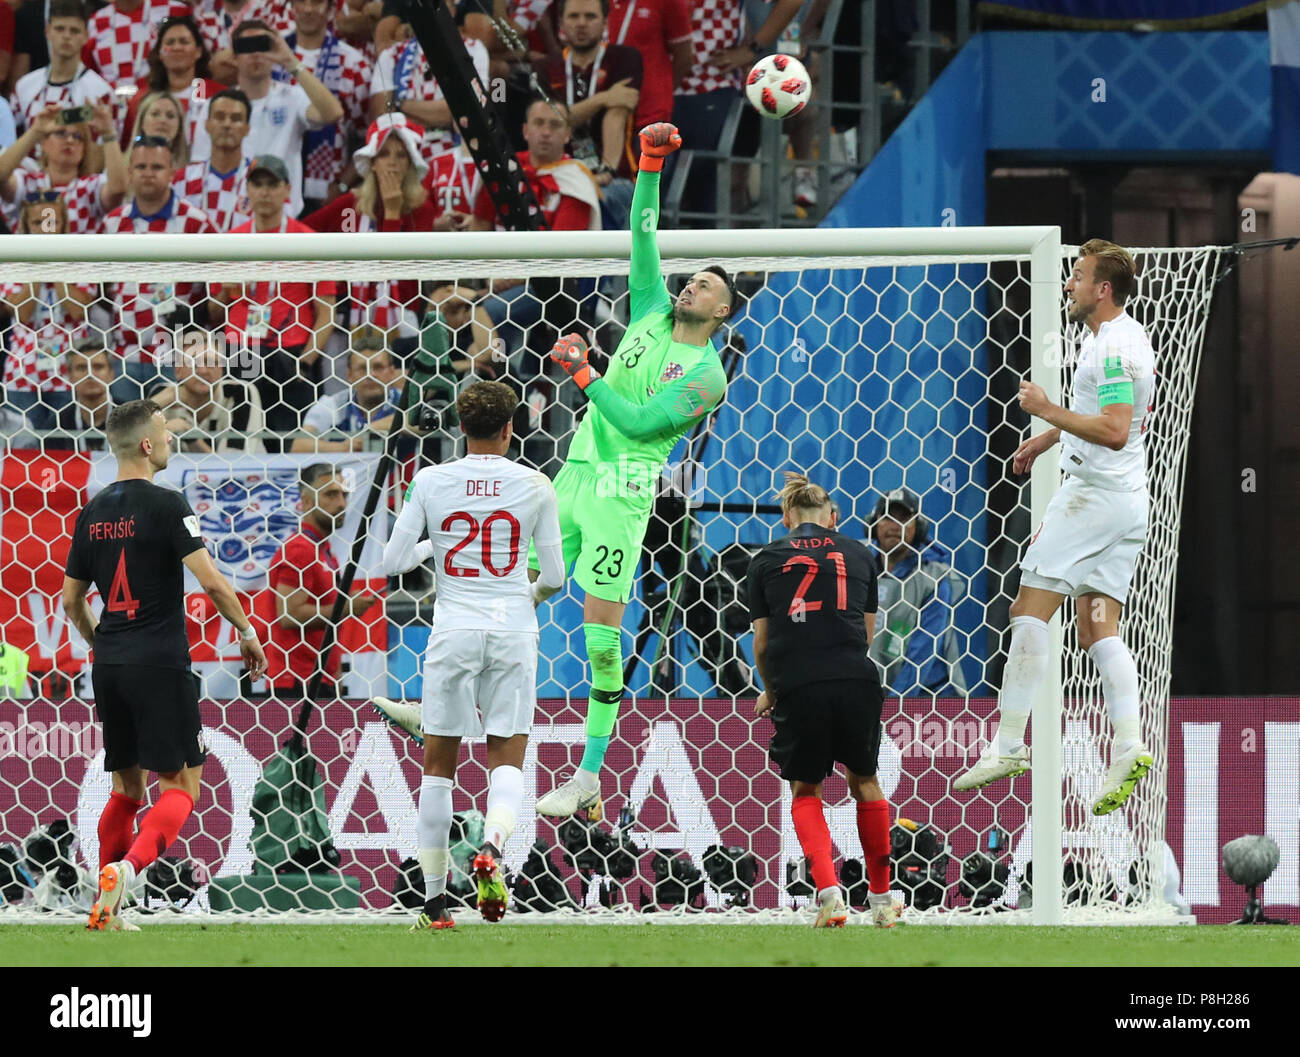 Moscow, Russia. 11th July, 2018. Goalkeeper Danijel Subasic (C) of Croatia defends during the 2018 FIFA World Cup semi-final match between England and Croatia in Moscow, Russia, July 11, 2018. Credit: Yang Lei/Xinhua/Alamy Live News Stock Photo